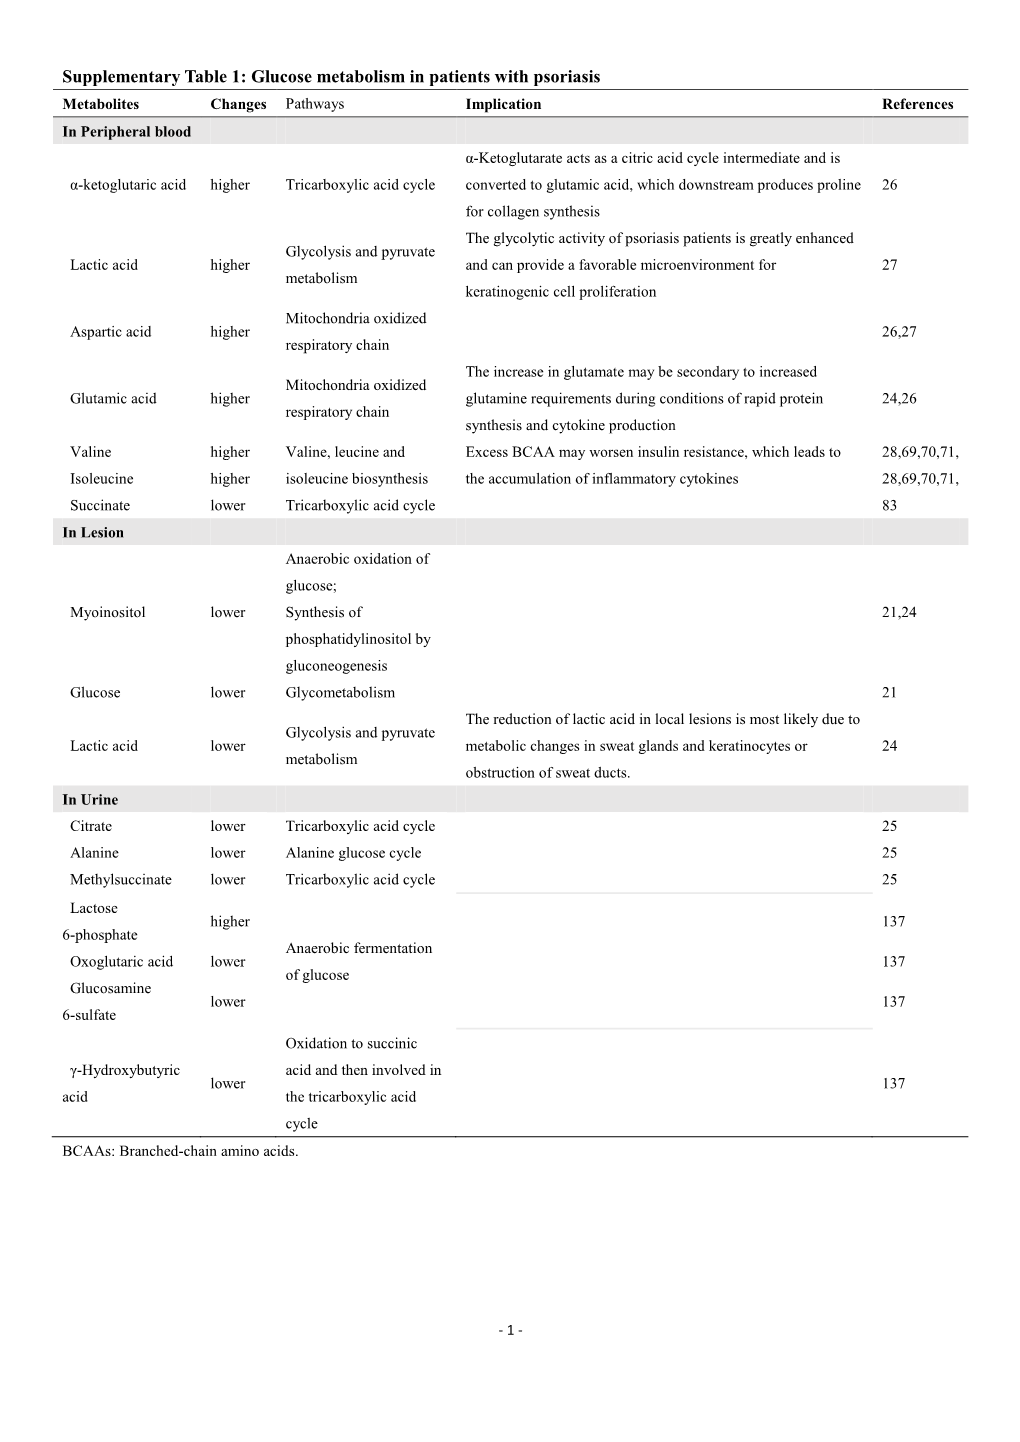 Supplementary Table 1: Glucose Metabolism in Patients with Psoriasis